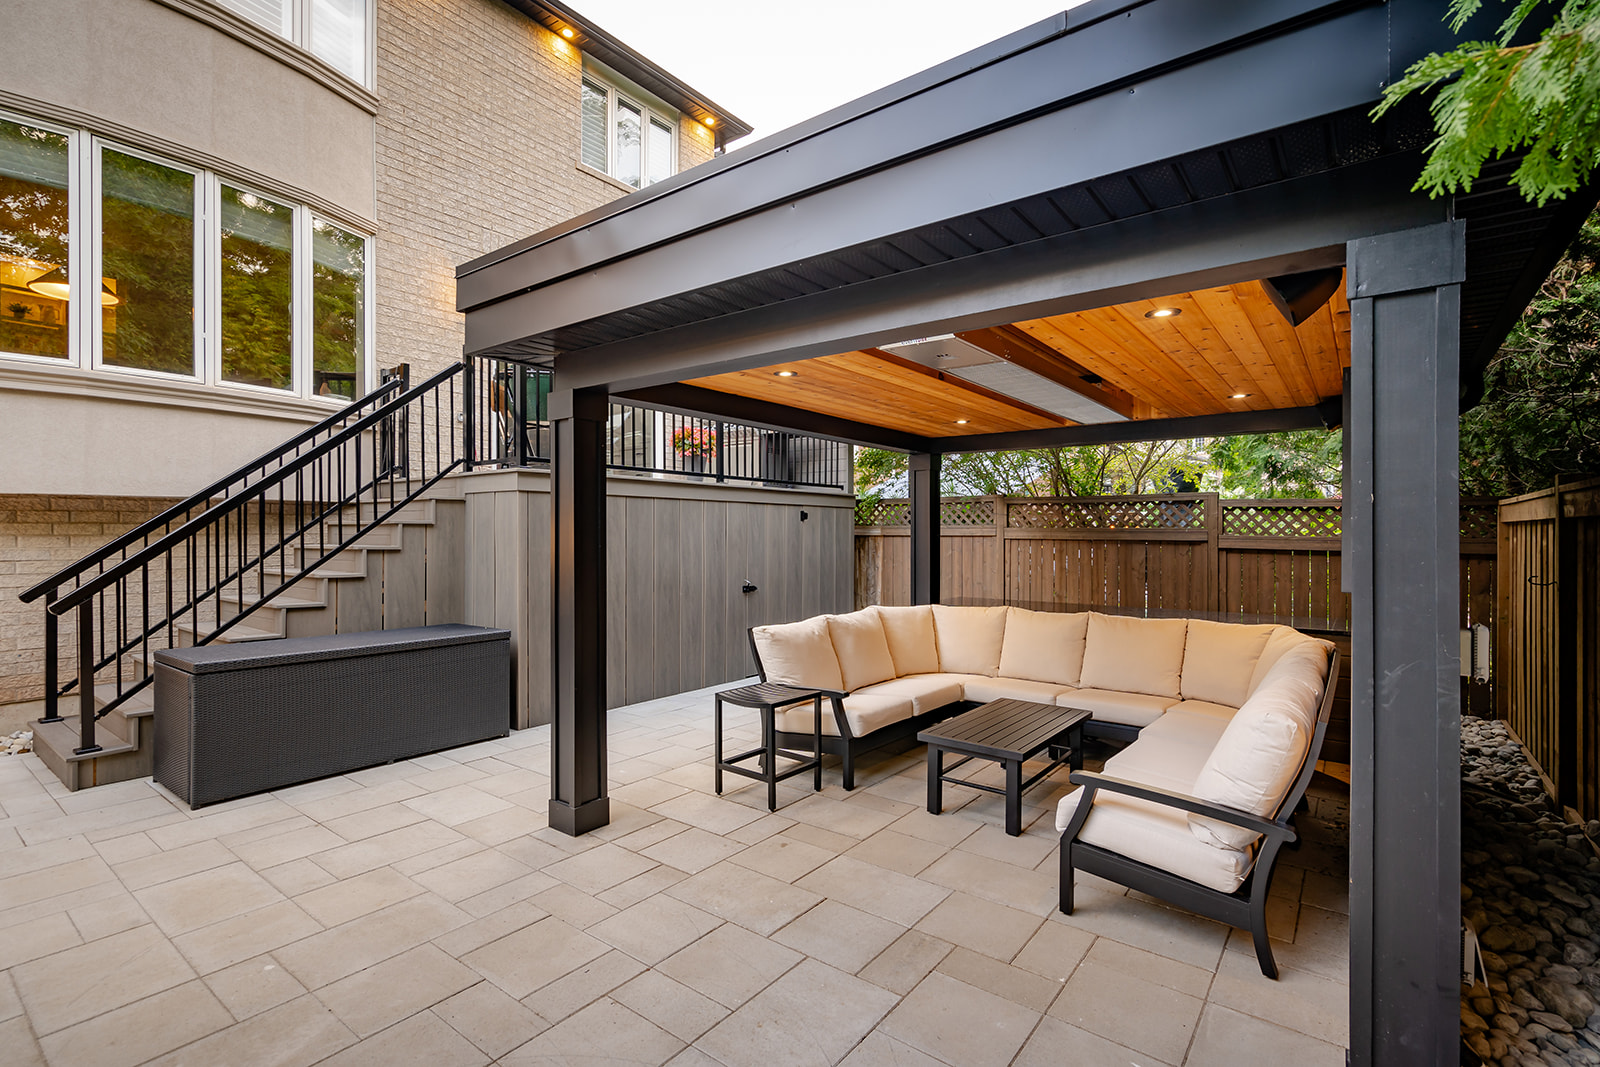 An outdoor seating area underneath a gazebo.